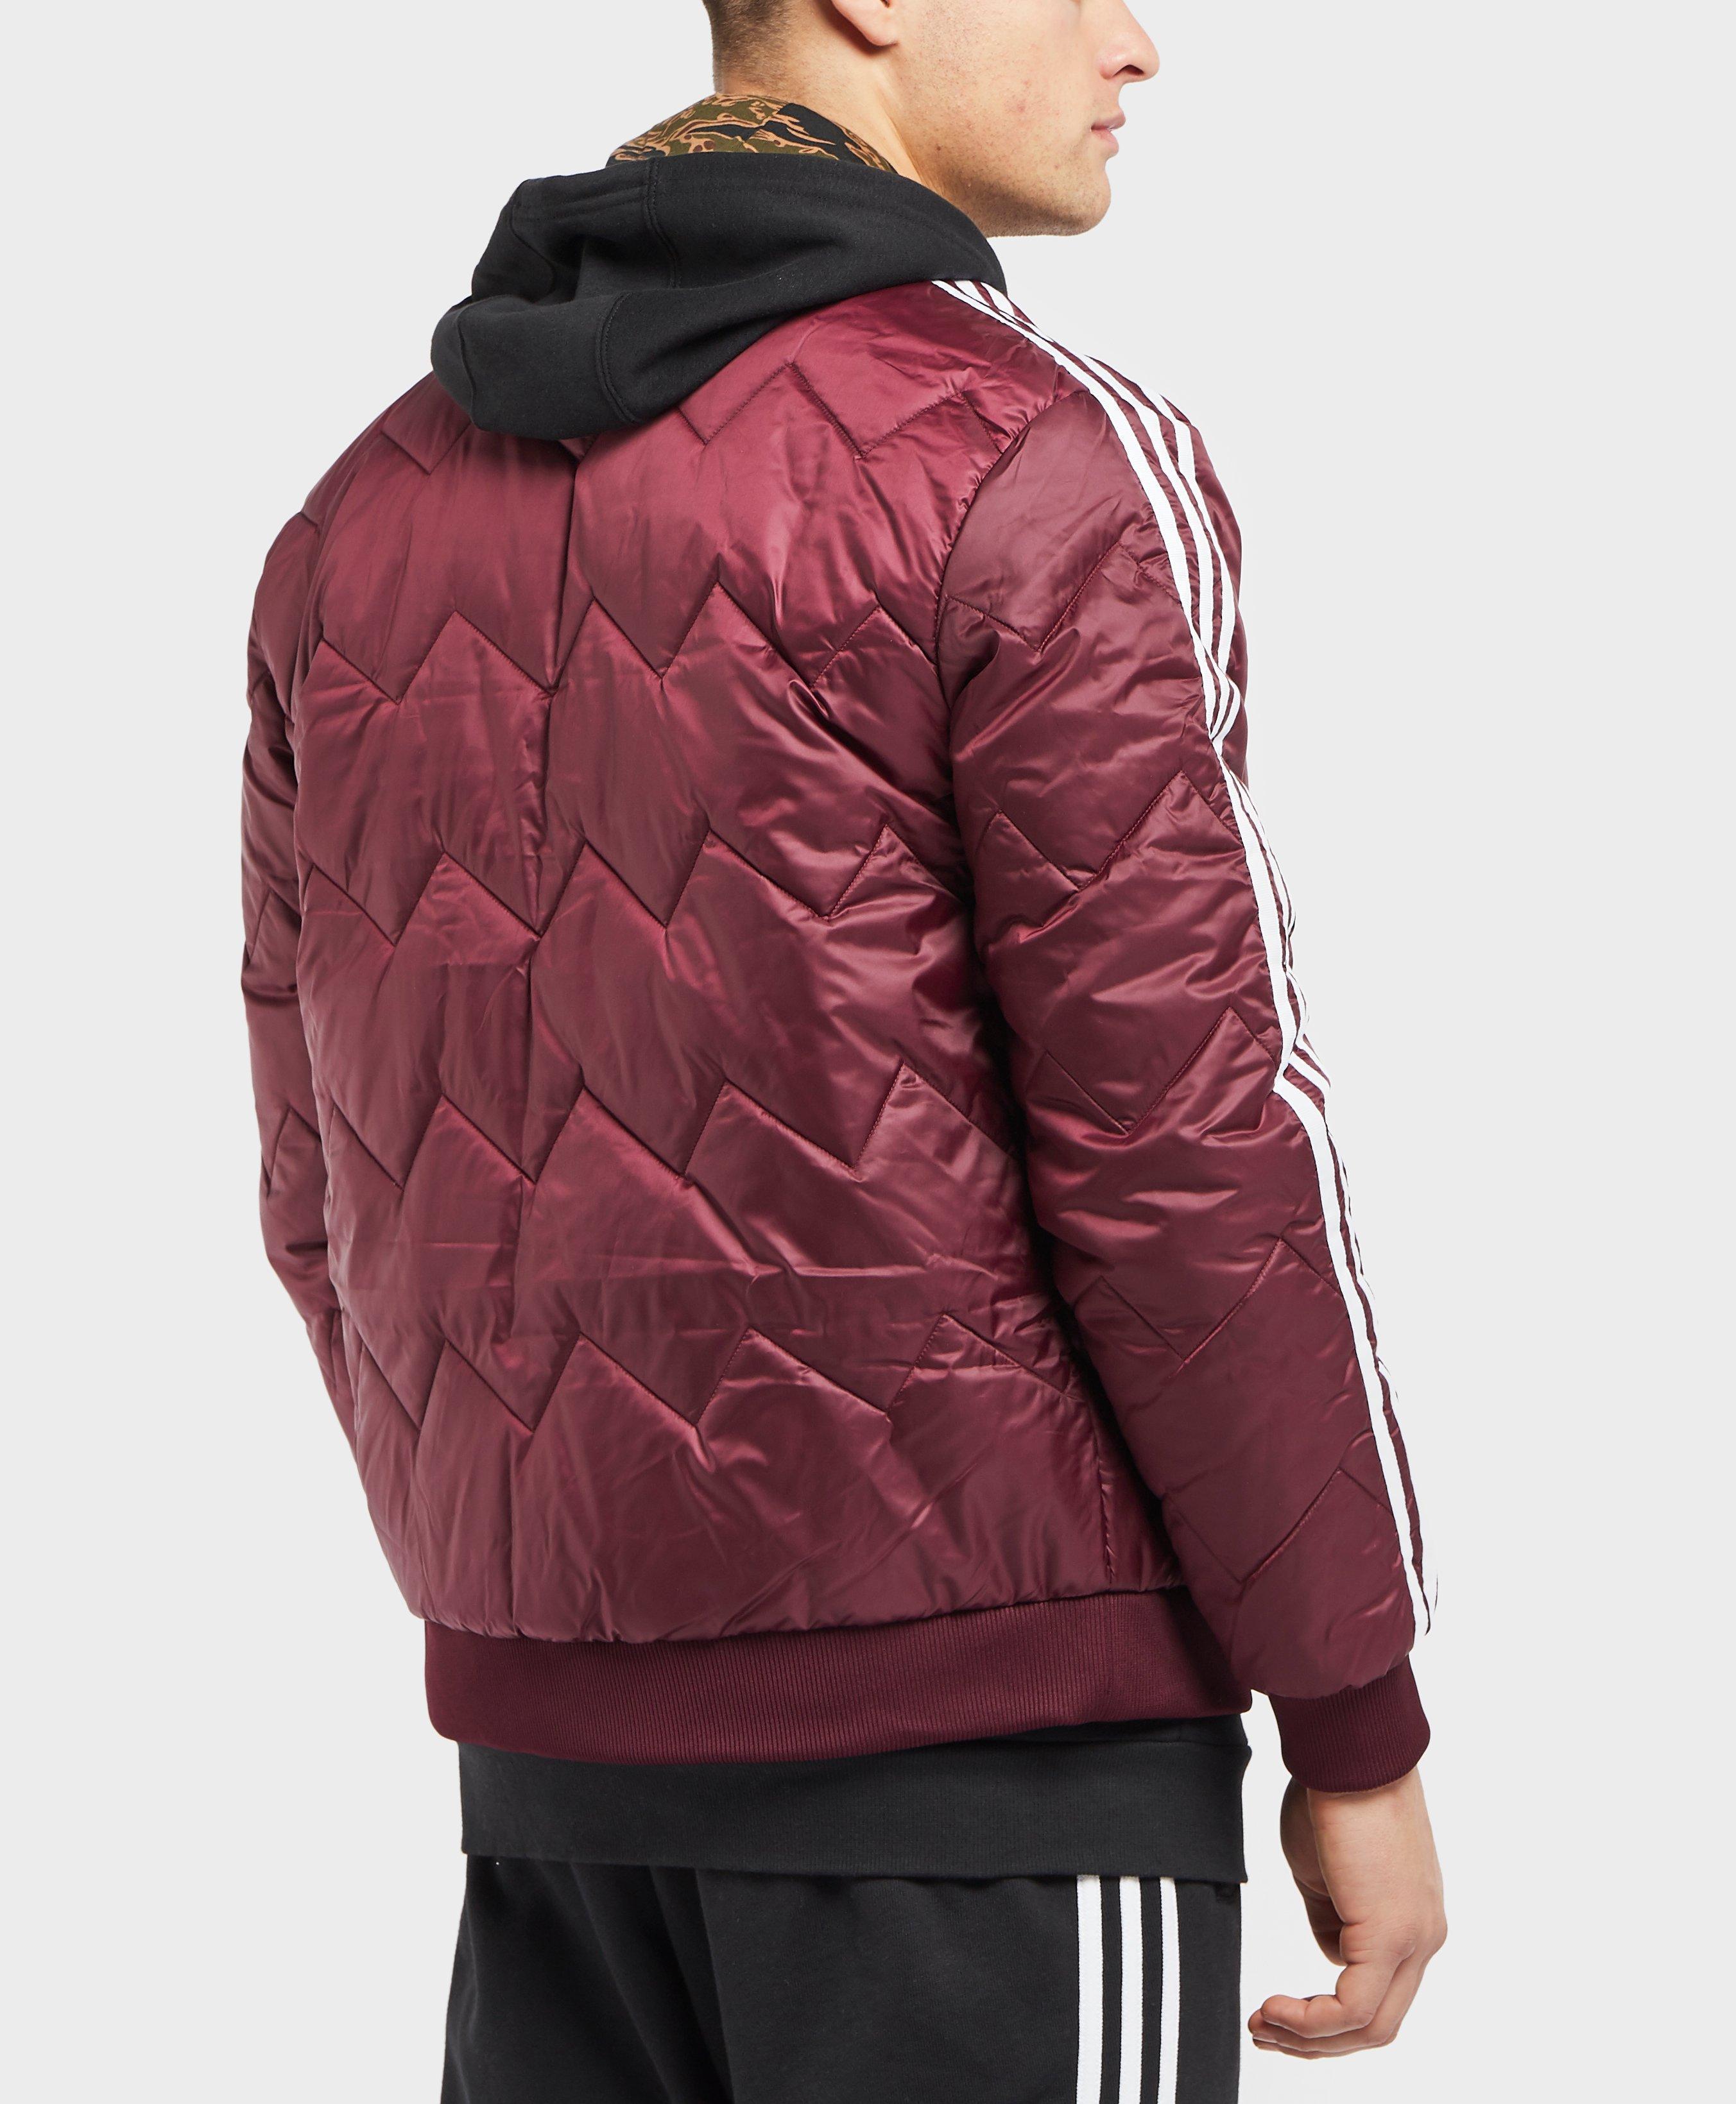 adidas Originals Synthetic Sst Quilted Bomber Jacket for Men - Lyst